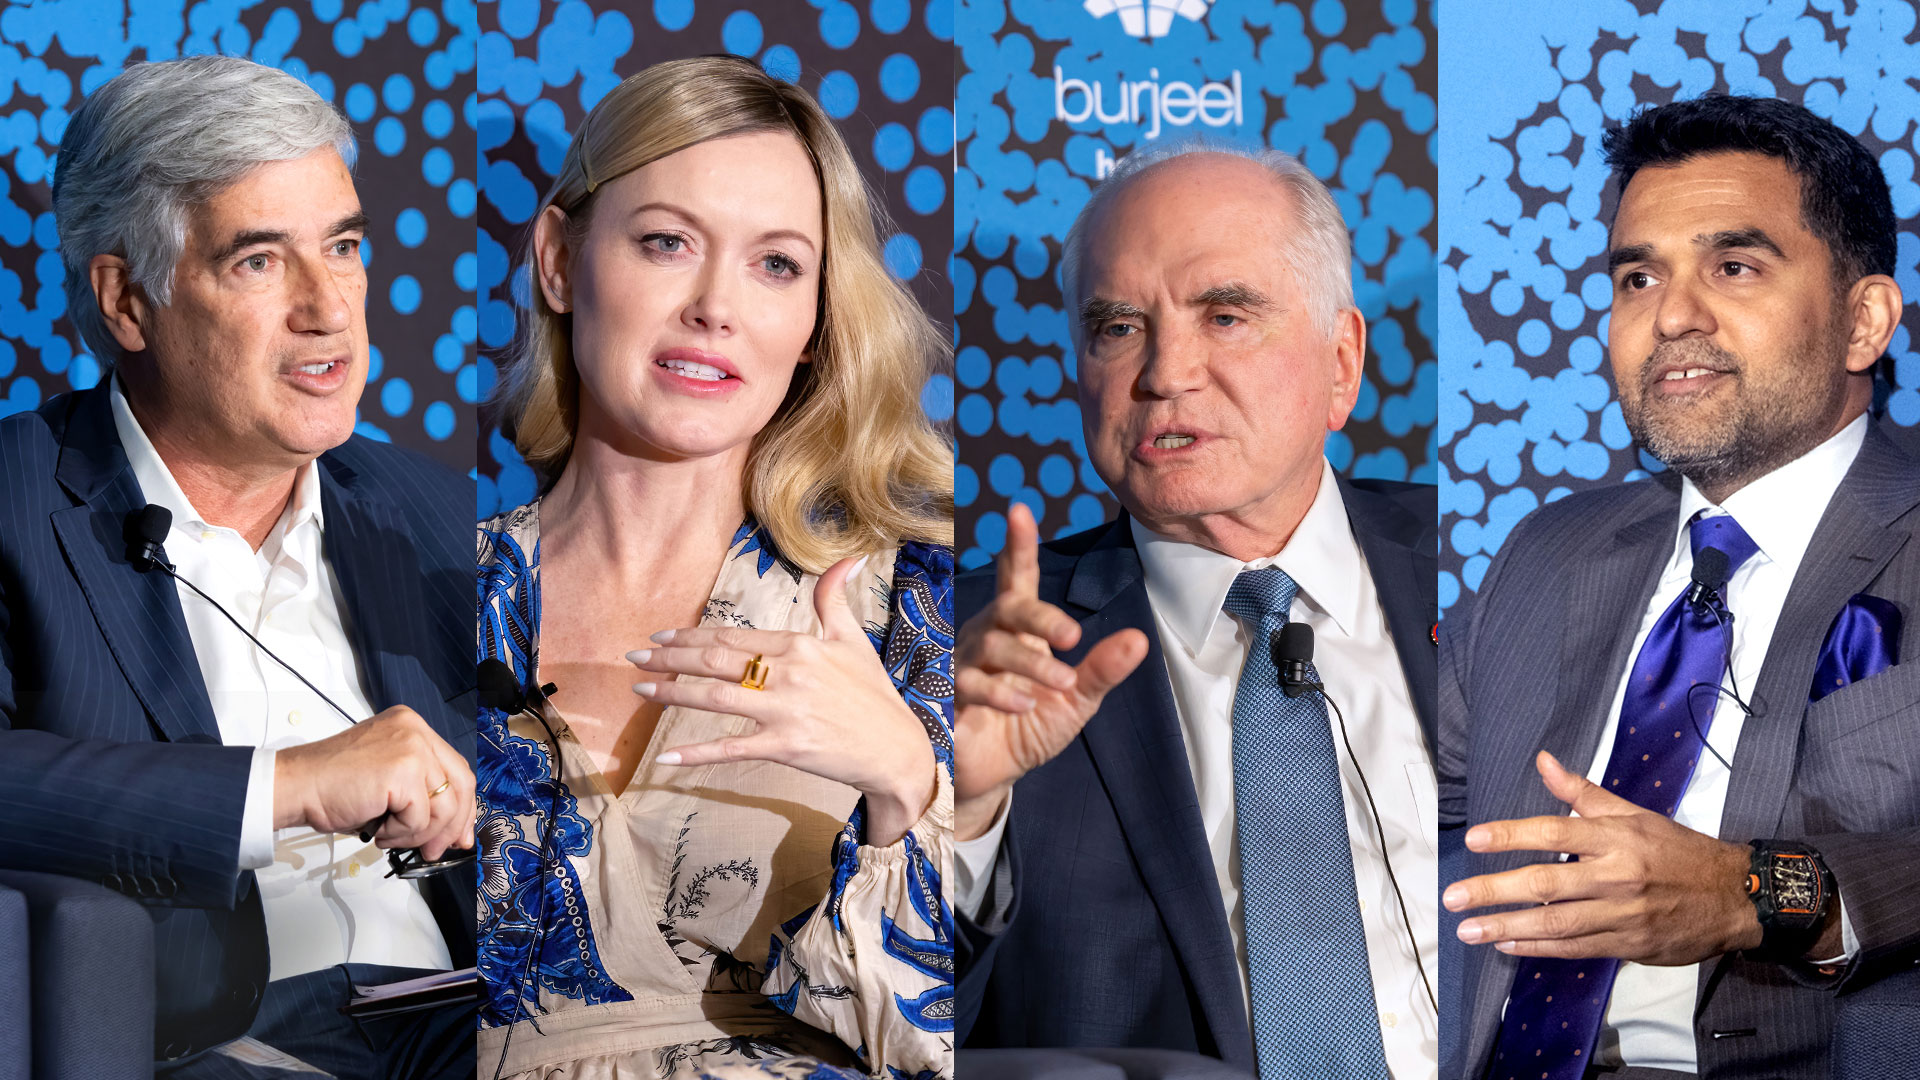 Burjeel Holdings Oncology Conference Celebrates 10 Years, Focusing on Equitable Solutions for Cancer Care